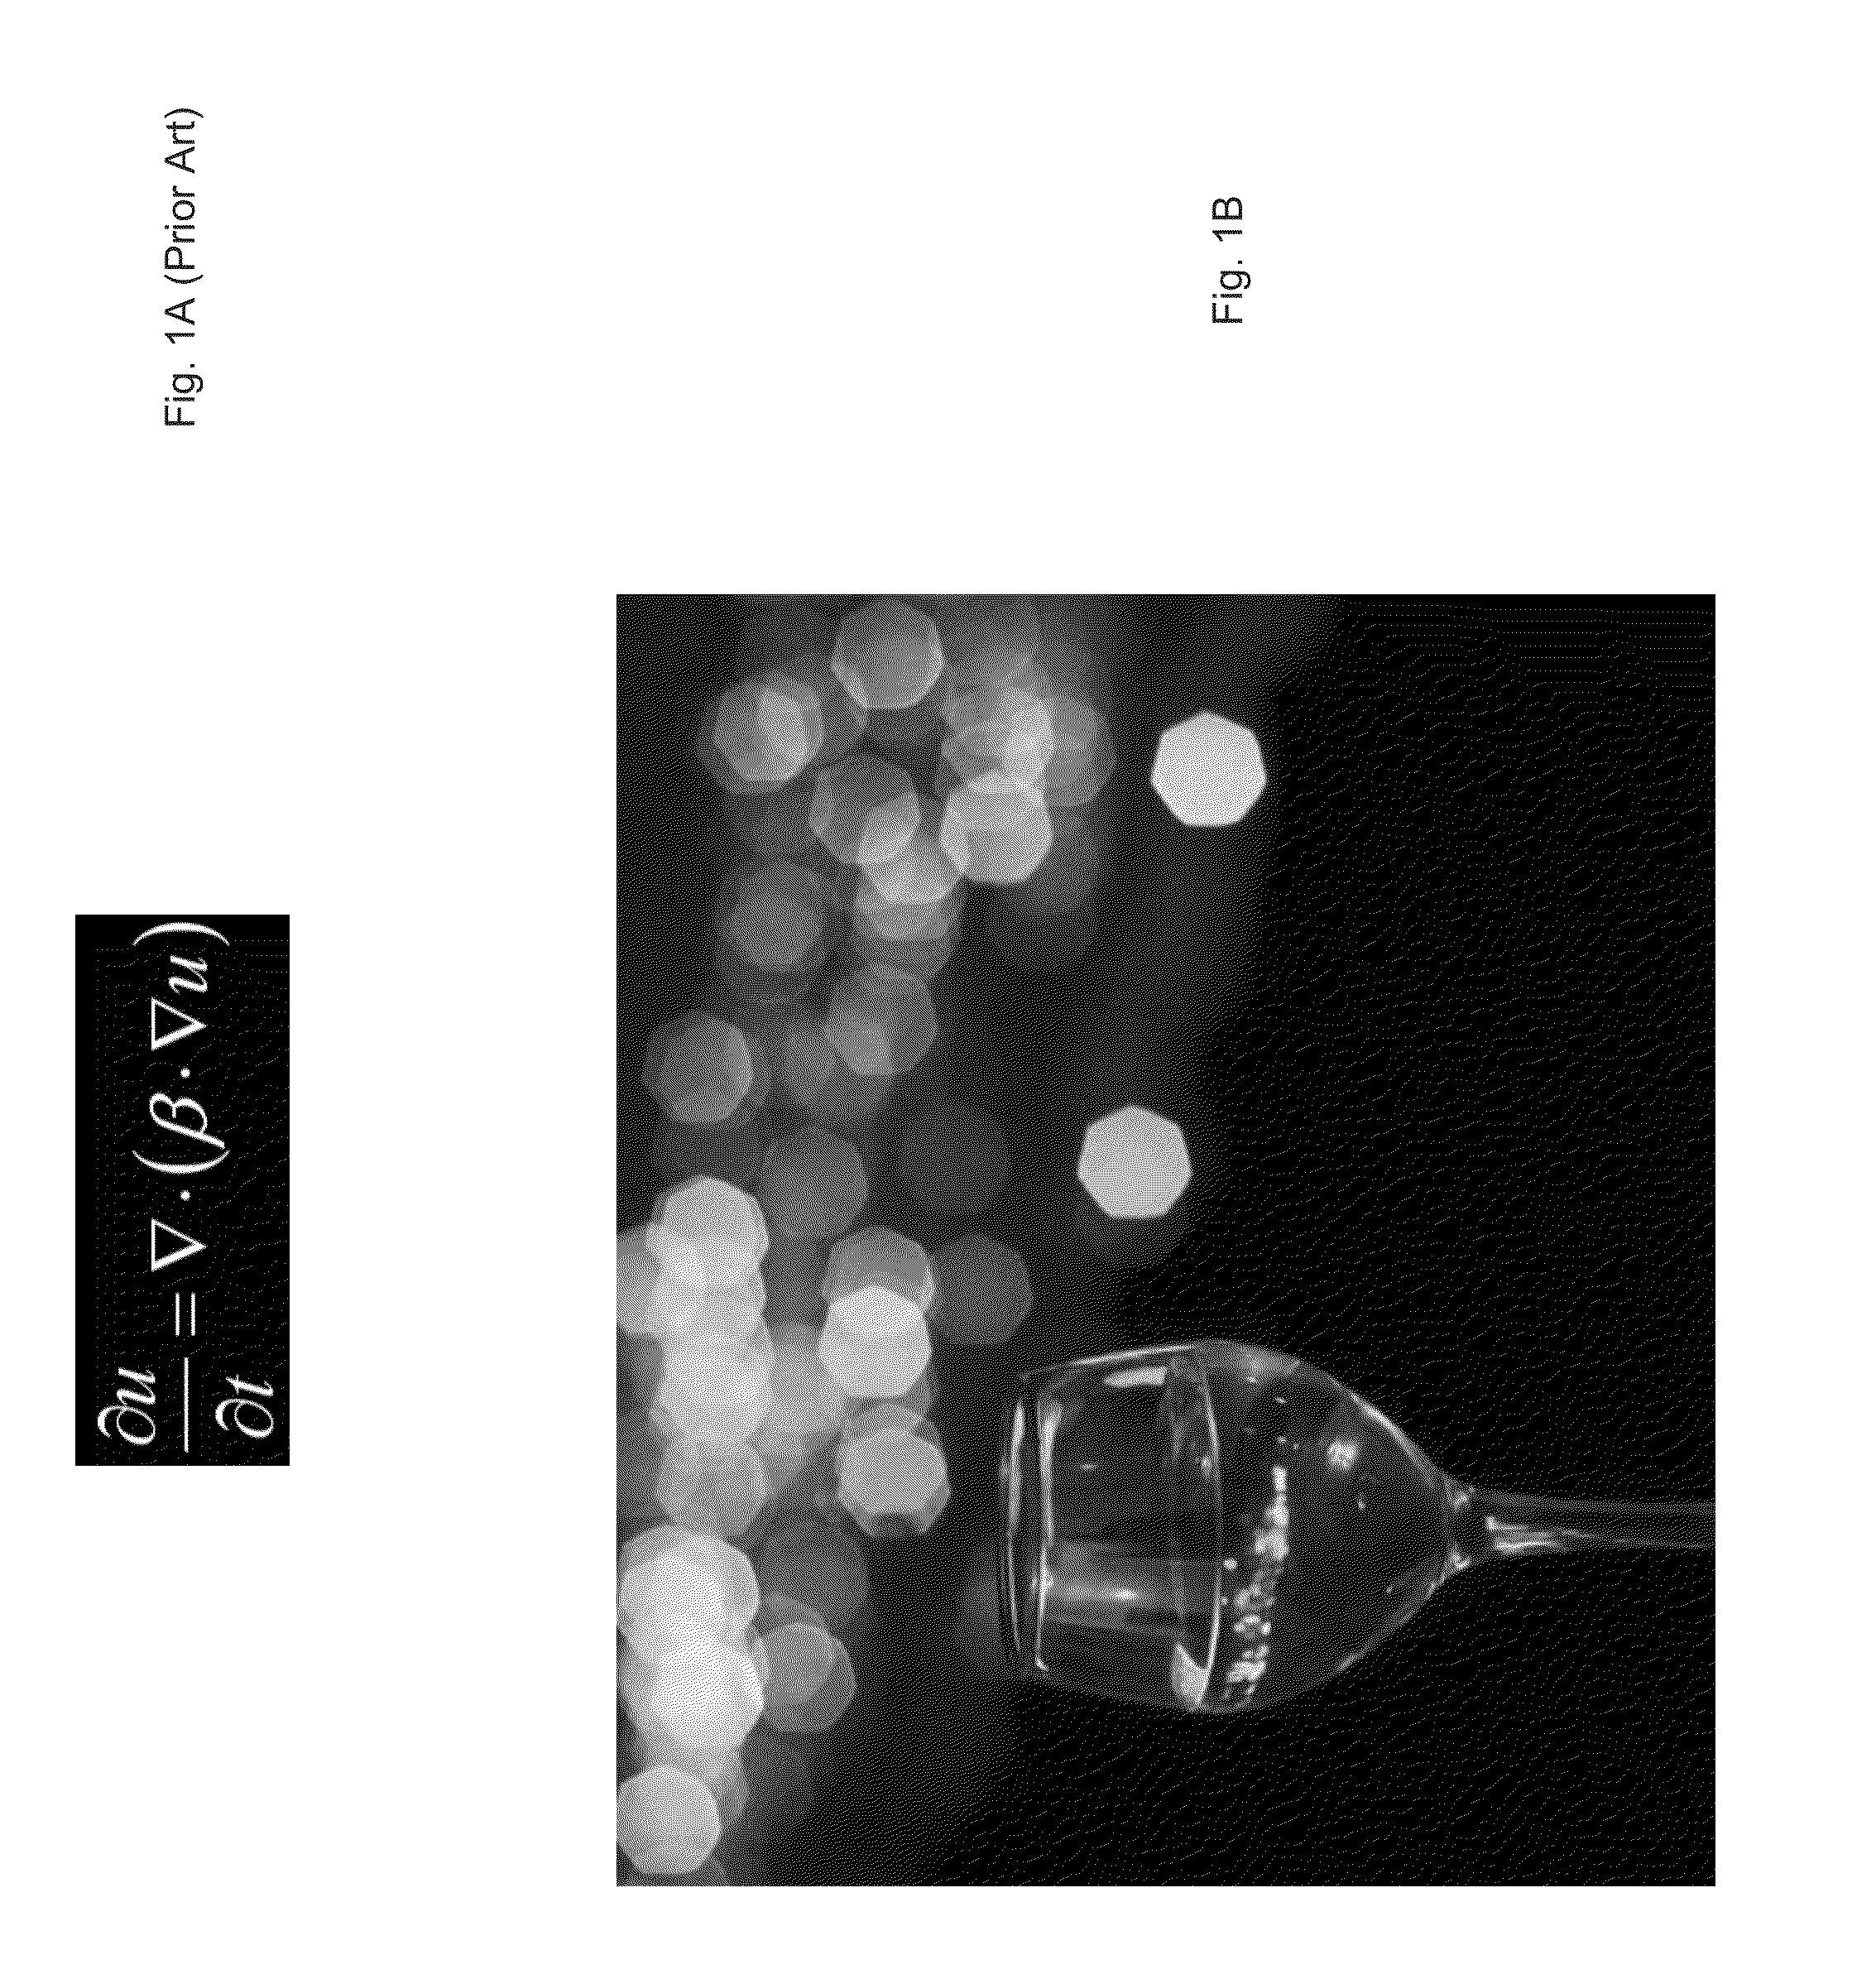 Method and system for rendering simulated depth-of-field visual effect